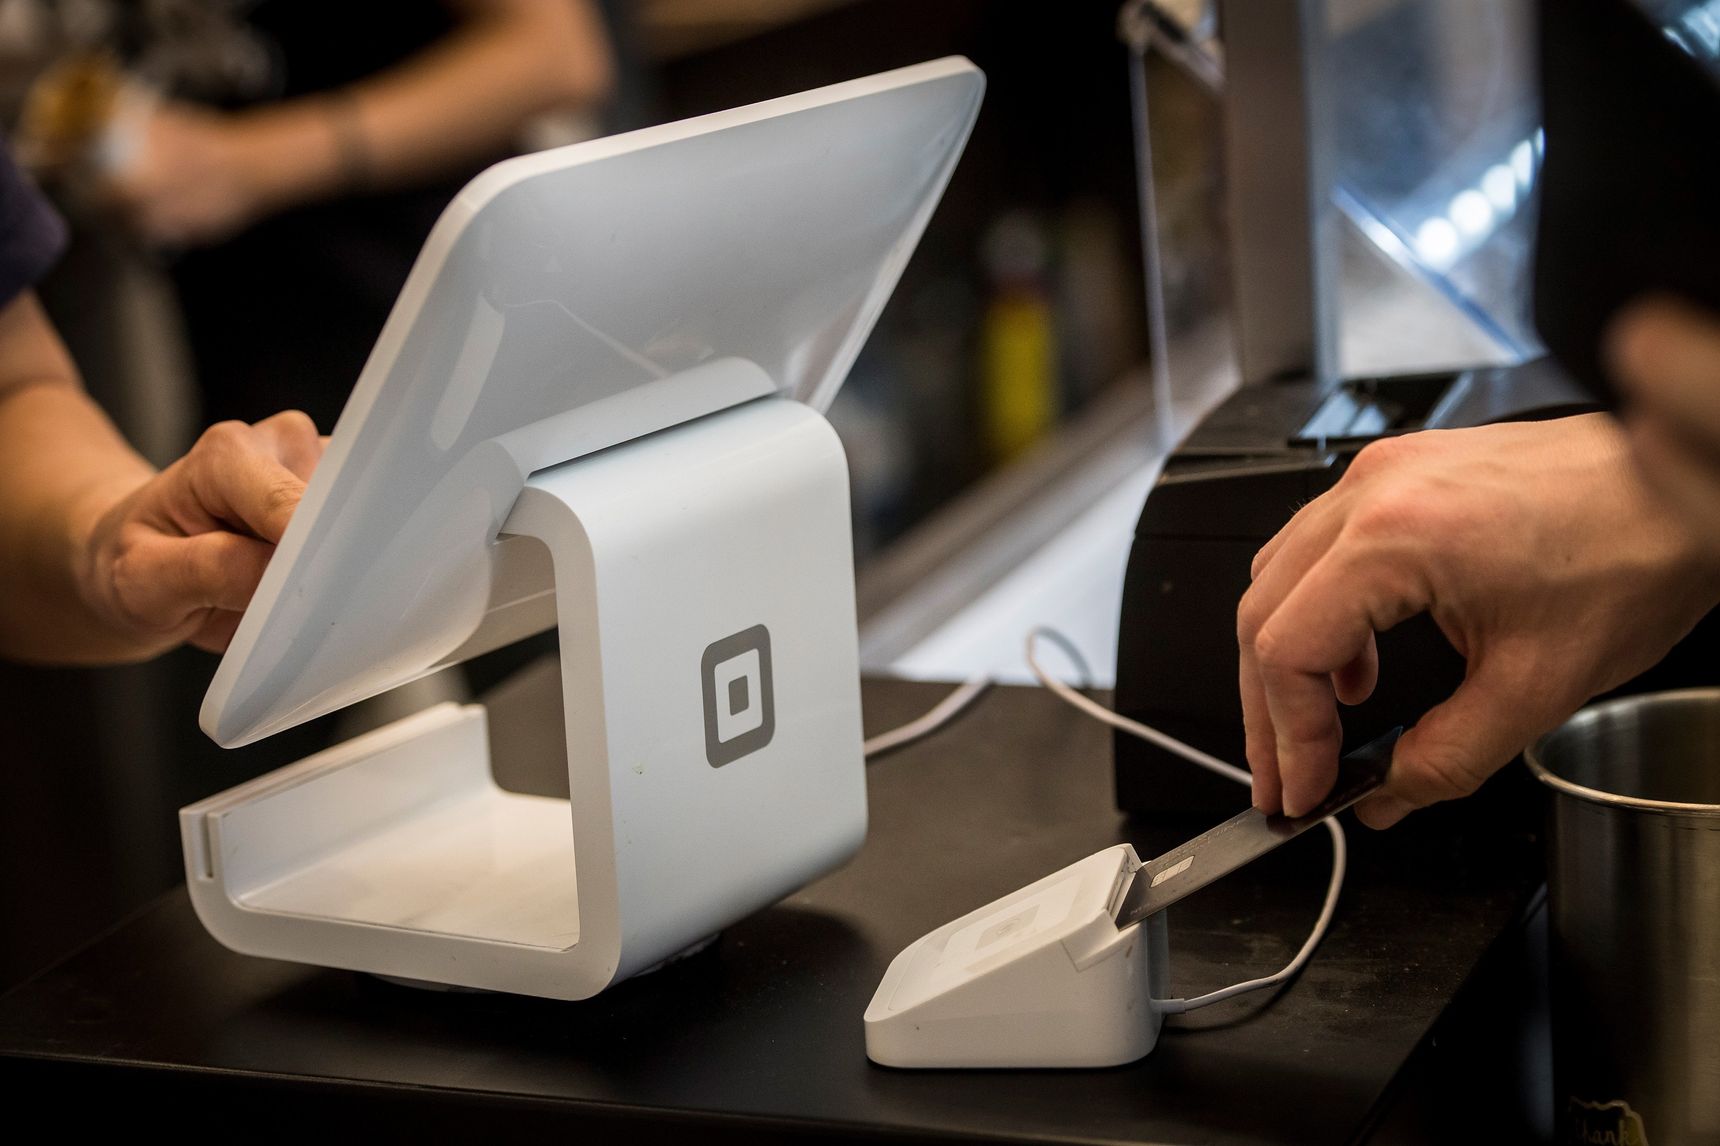 SQUARE AGREES TO ACQUIRE AFTERPAY FOR $39 BILLION